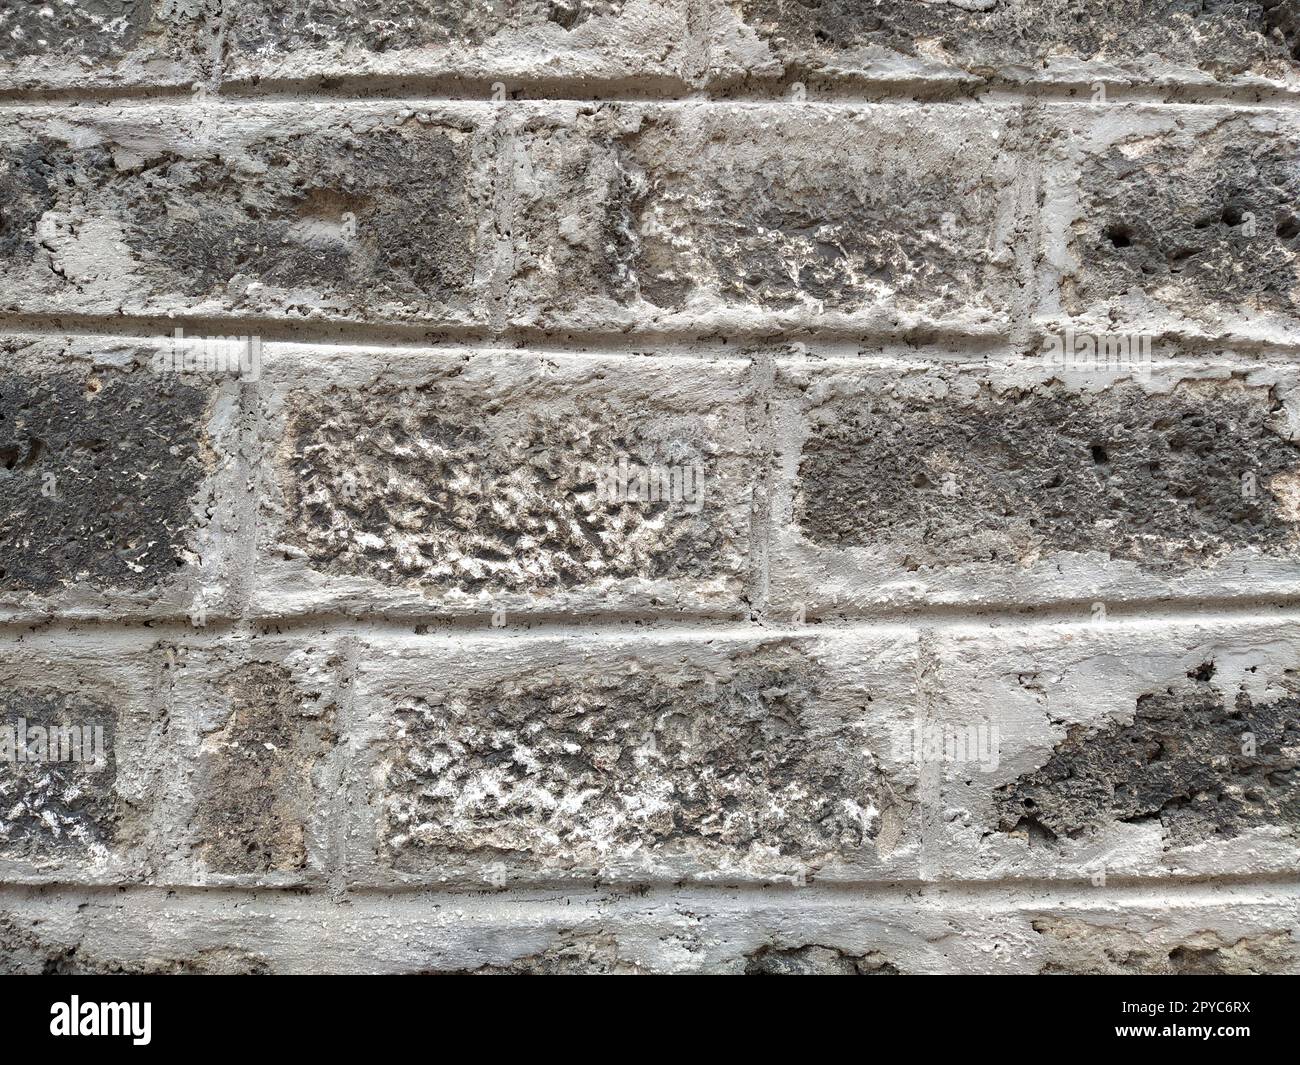 Weathered aged stone masonry of old house. Ancient brick wall background. Old uneven scratched stone bricks texture. Turkish building wall. Rough limestone wall backdrop Stock Photo